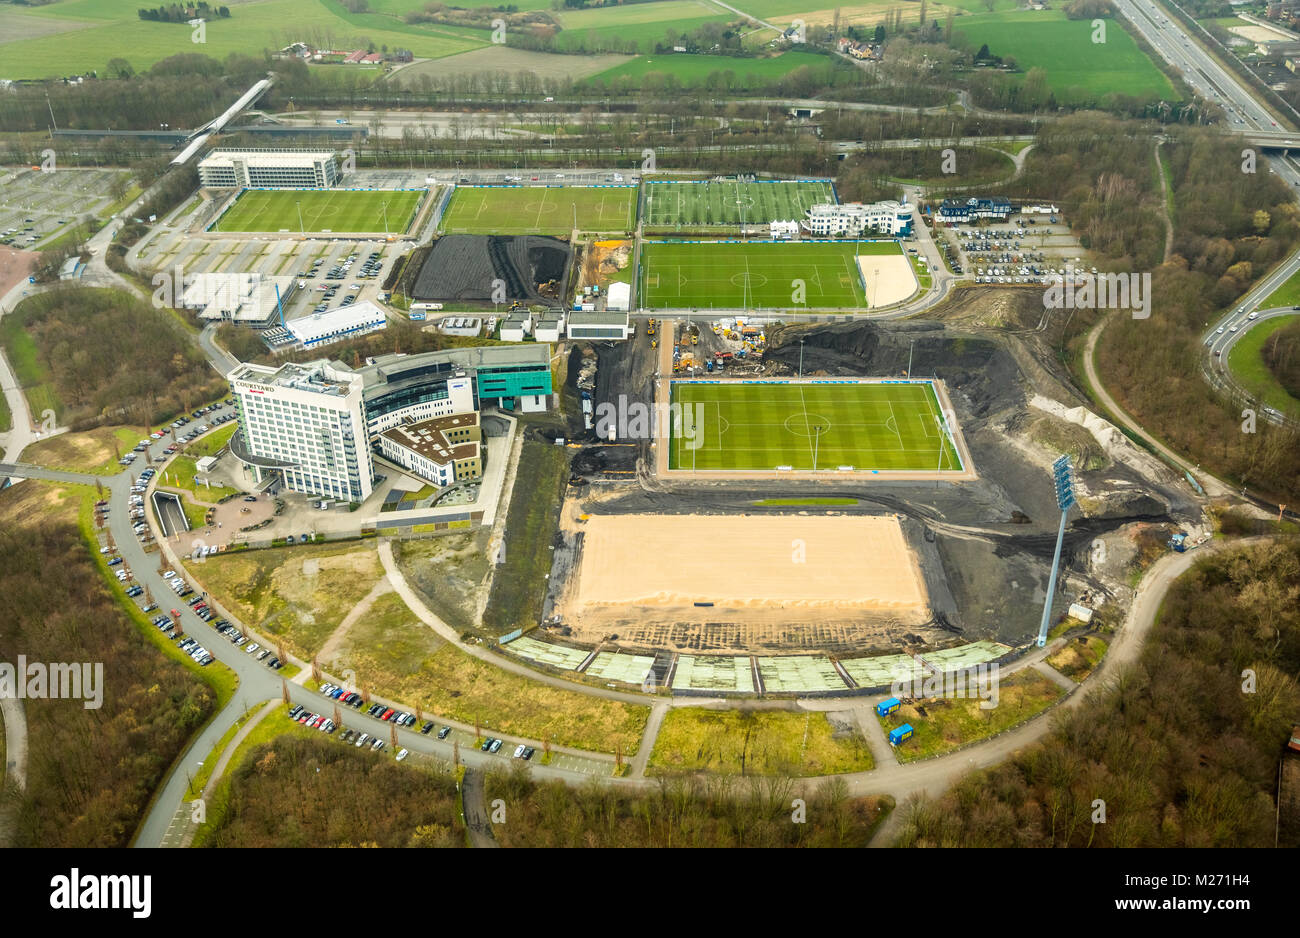 Construction project Bergerfeld to restructure and expand the club facilities of FC Schalke 04 on the site of the former Park stadium in Gelsenkirchen Stock Photo